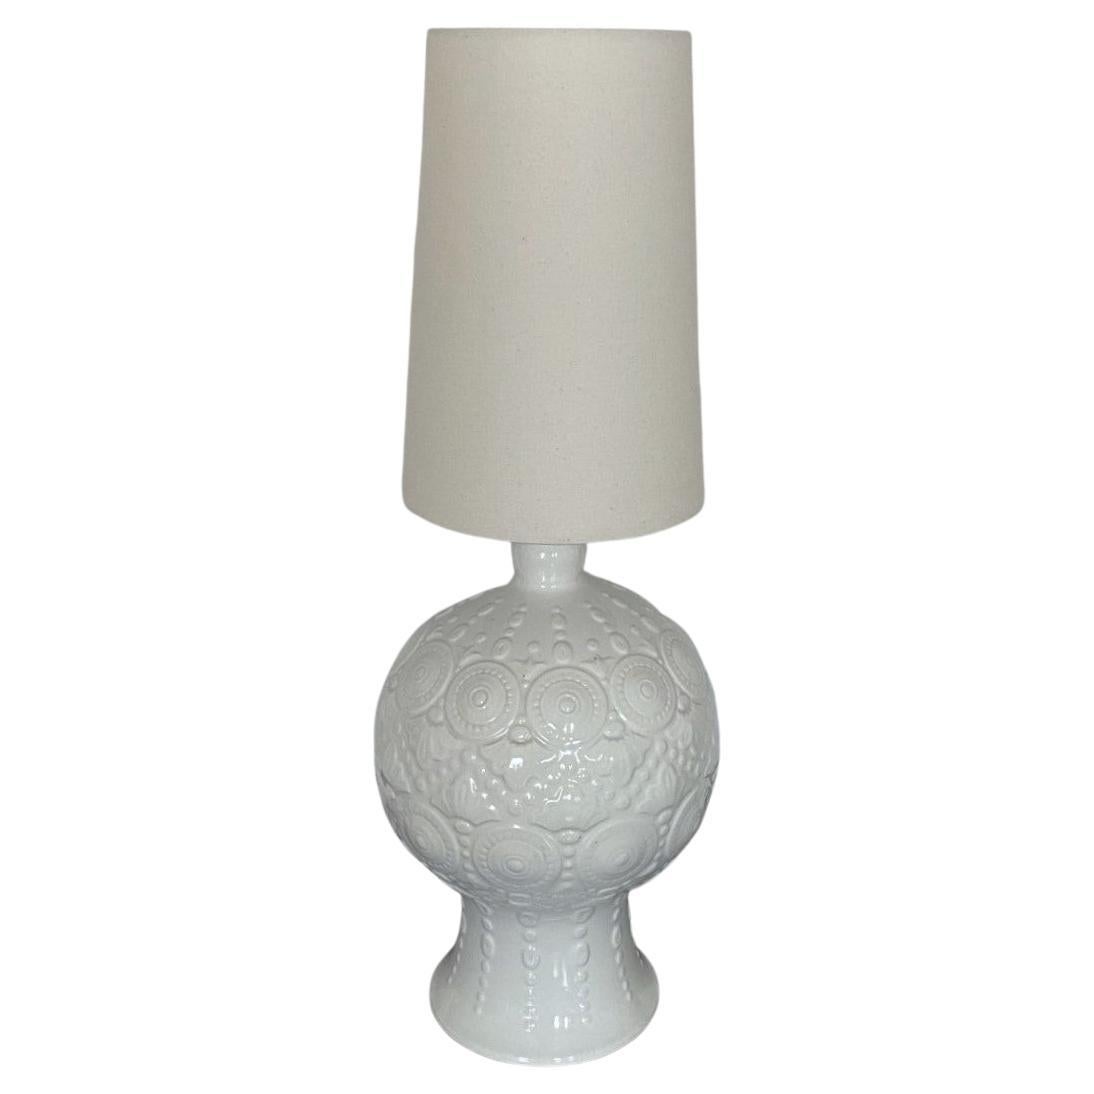 Spanish Hand-Crafted Glazed Ceramic Table Lamp White Textured Relief, 1970s 